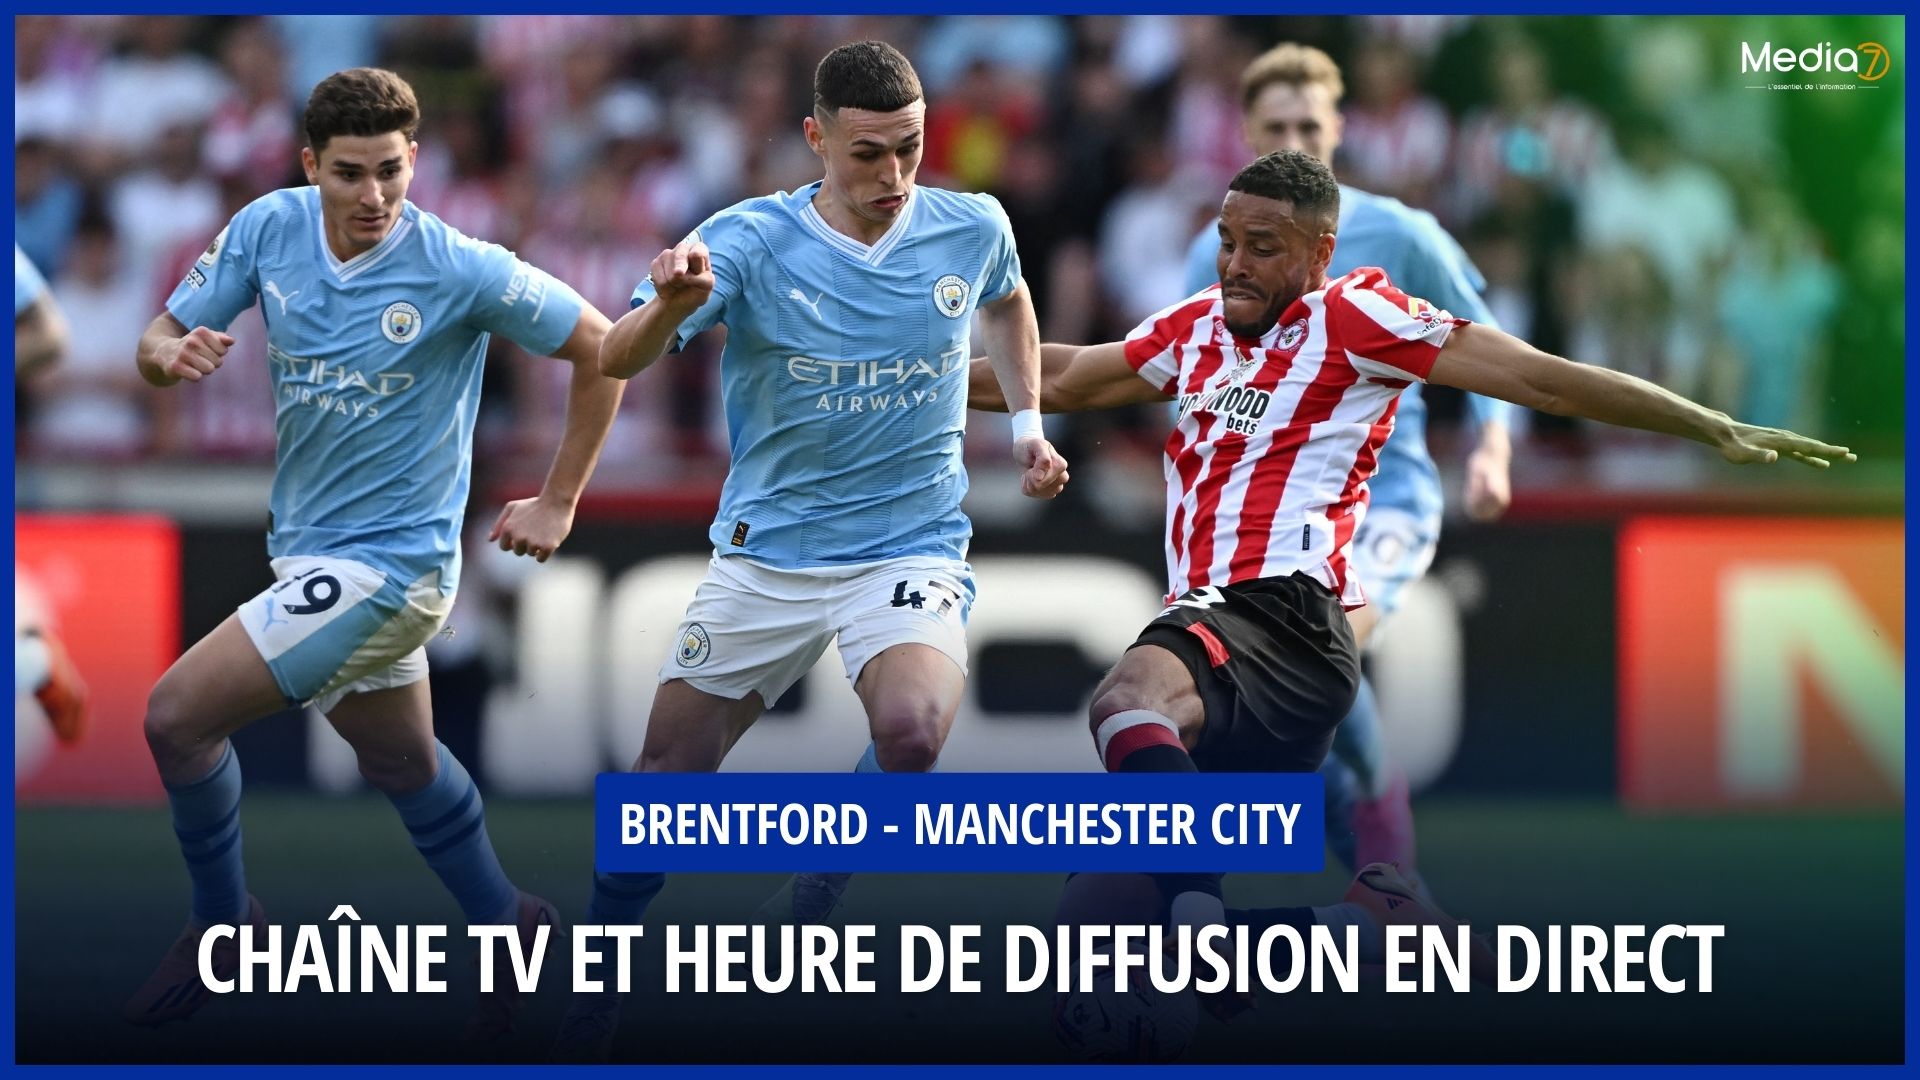 Brentford - Manchester City Match Live: TV Channel and Broadcast Schedule - Media7